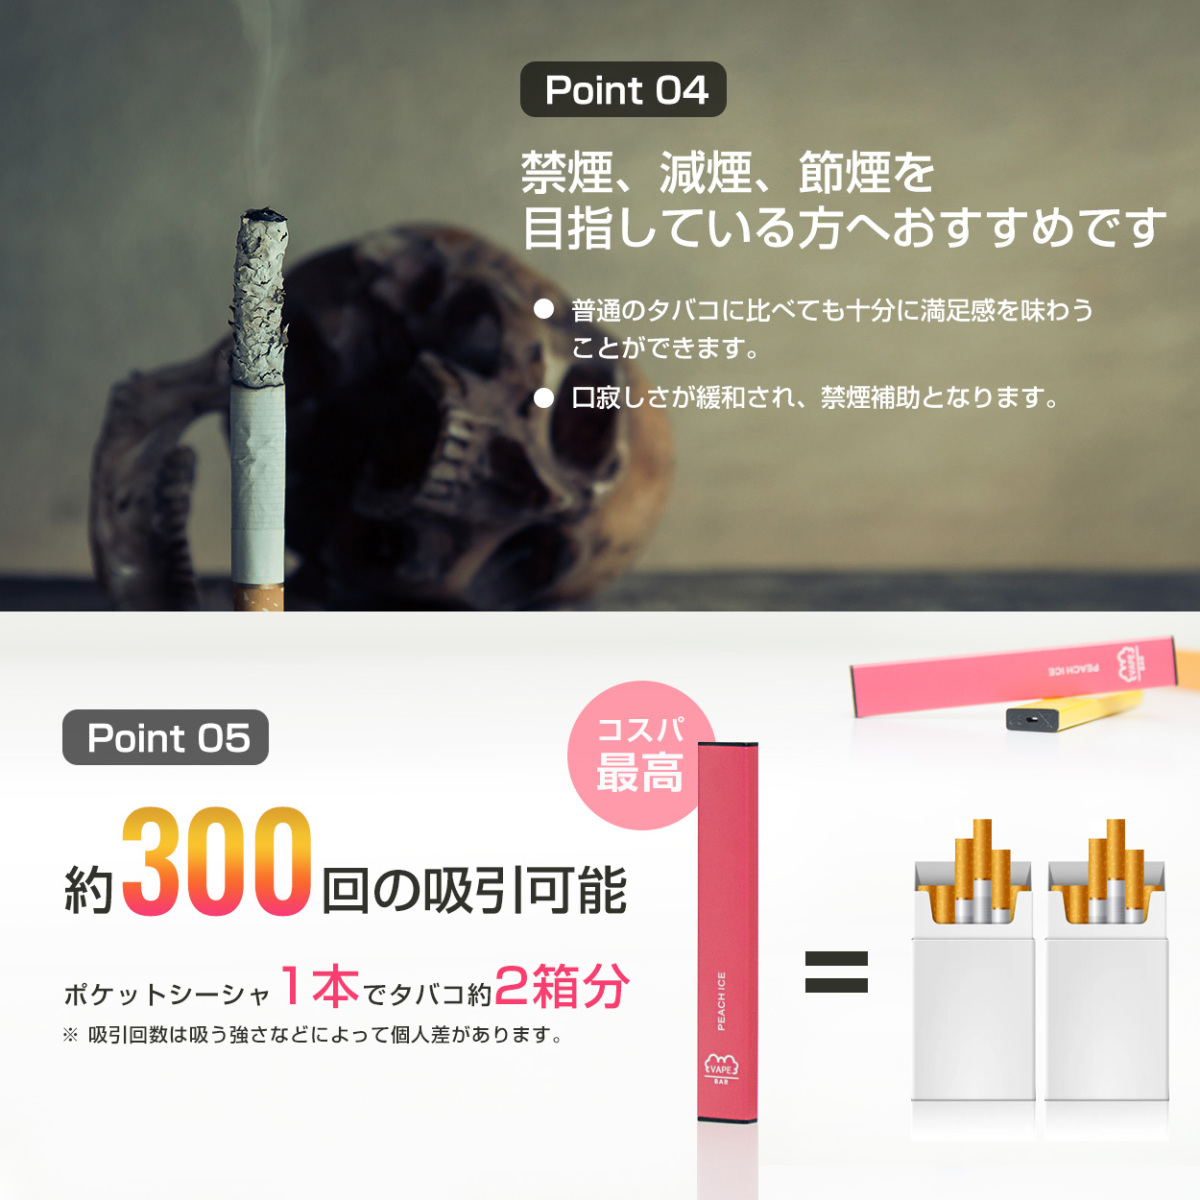  carrying mobile si- car mobile si- car mobile si- car pocket si- car disposable electron cigarettes tar Nico chin 0mg quit-smoking products cigarettes 1 piece packing water liquid 